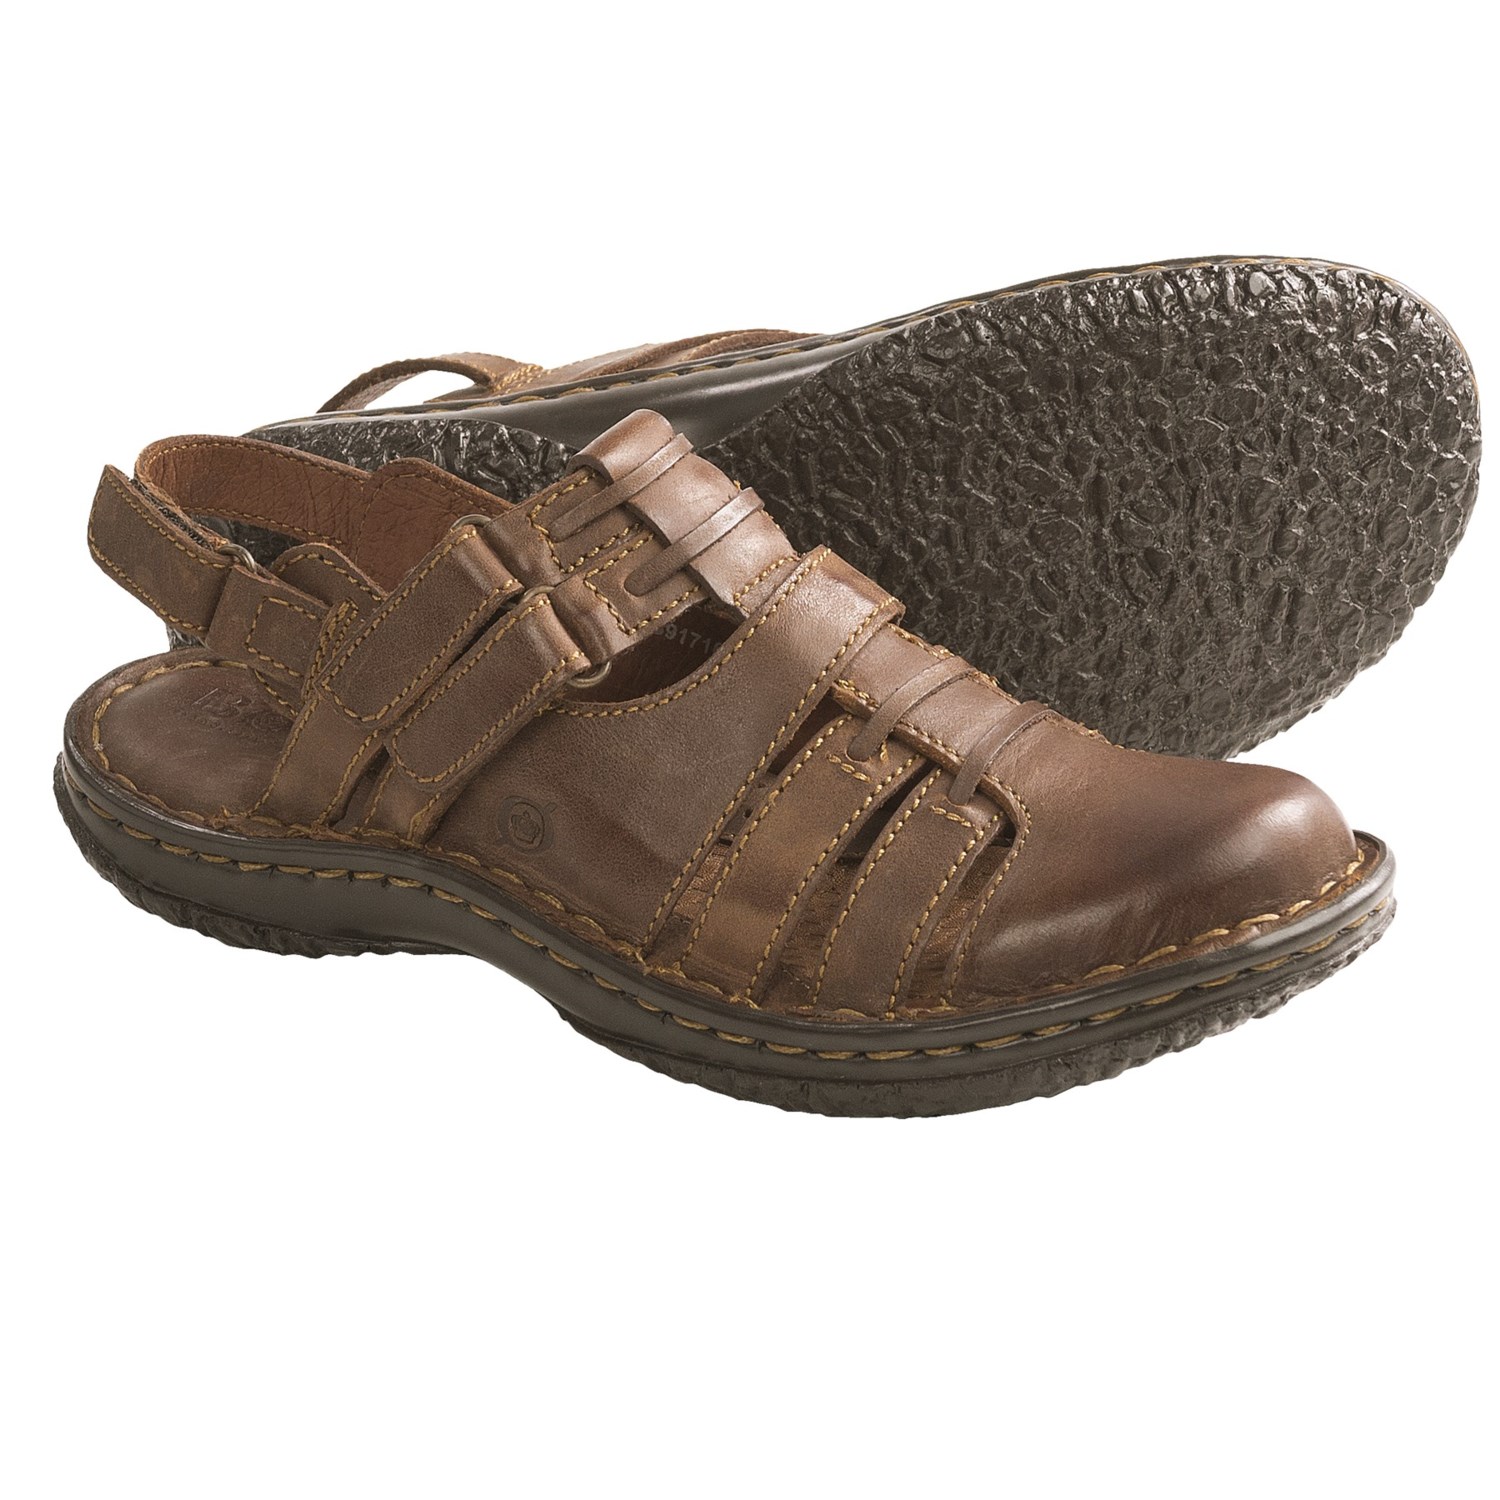 Born Verena Sandals (For Women) 6330A - Save 33%